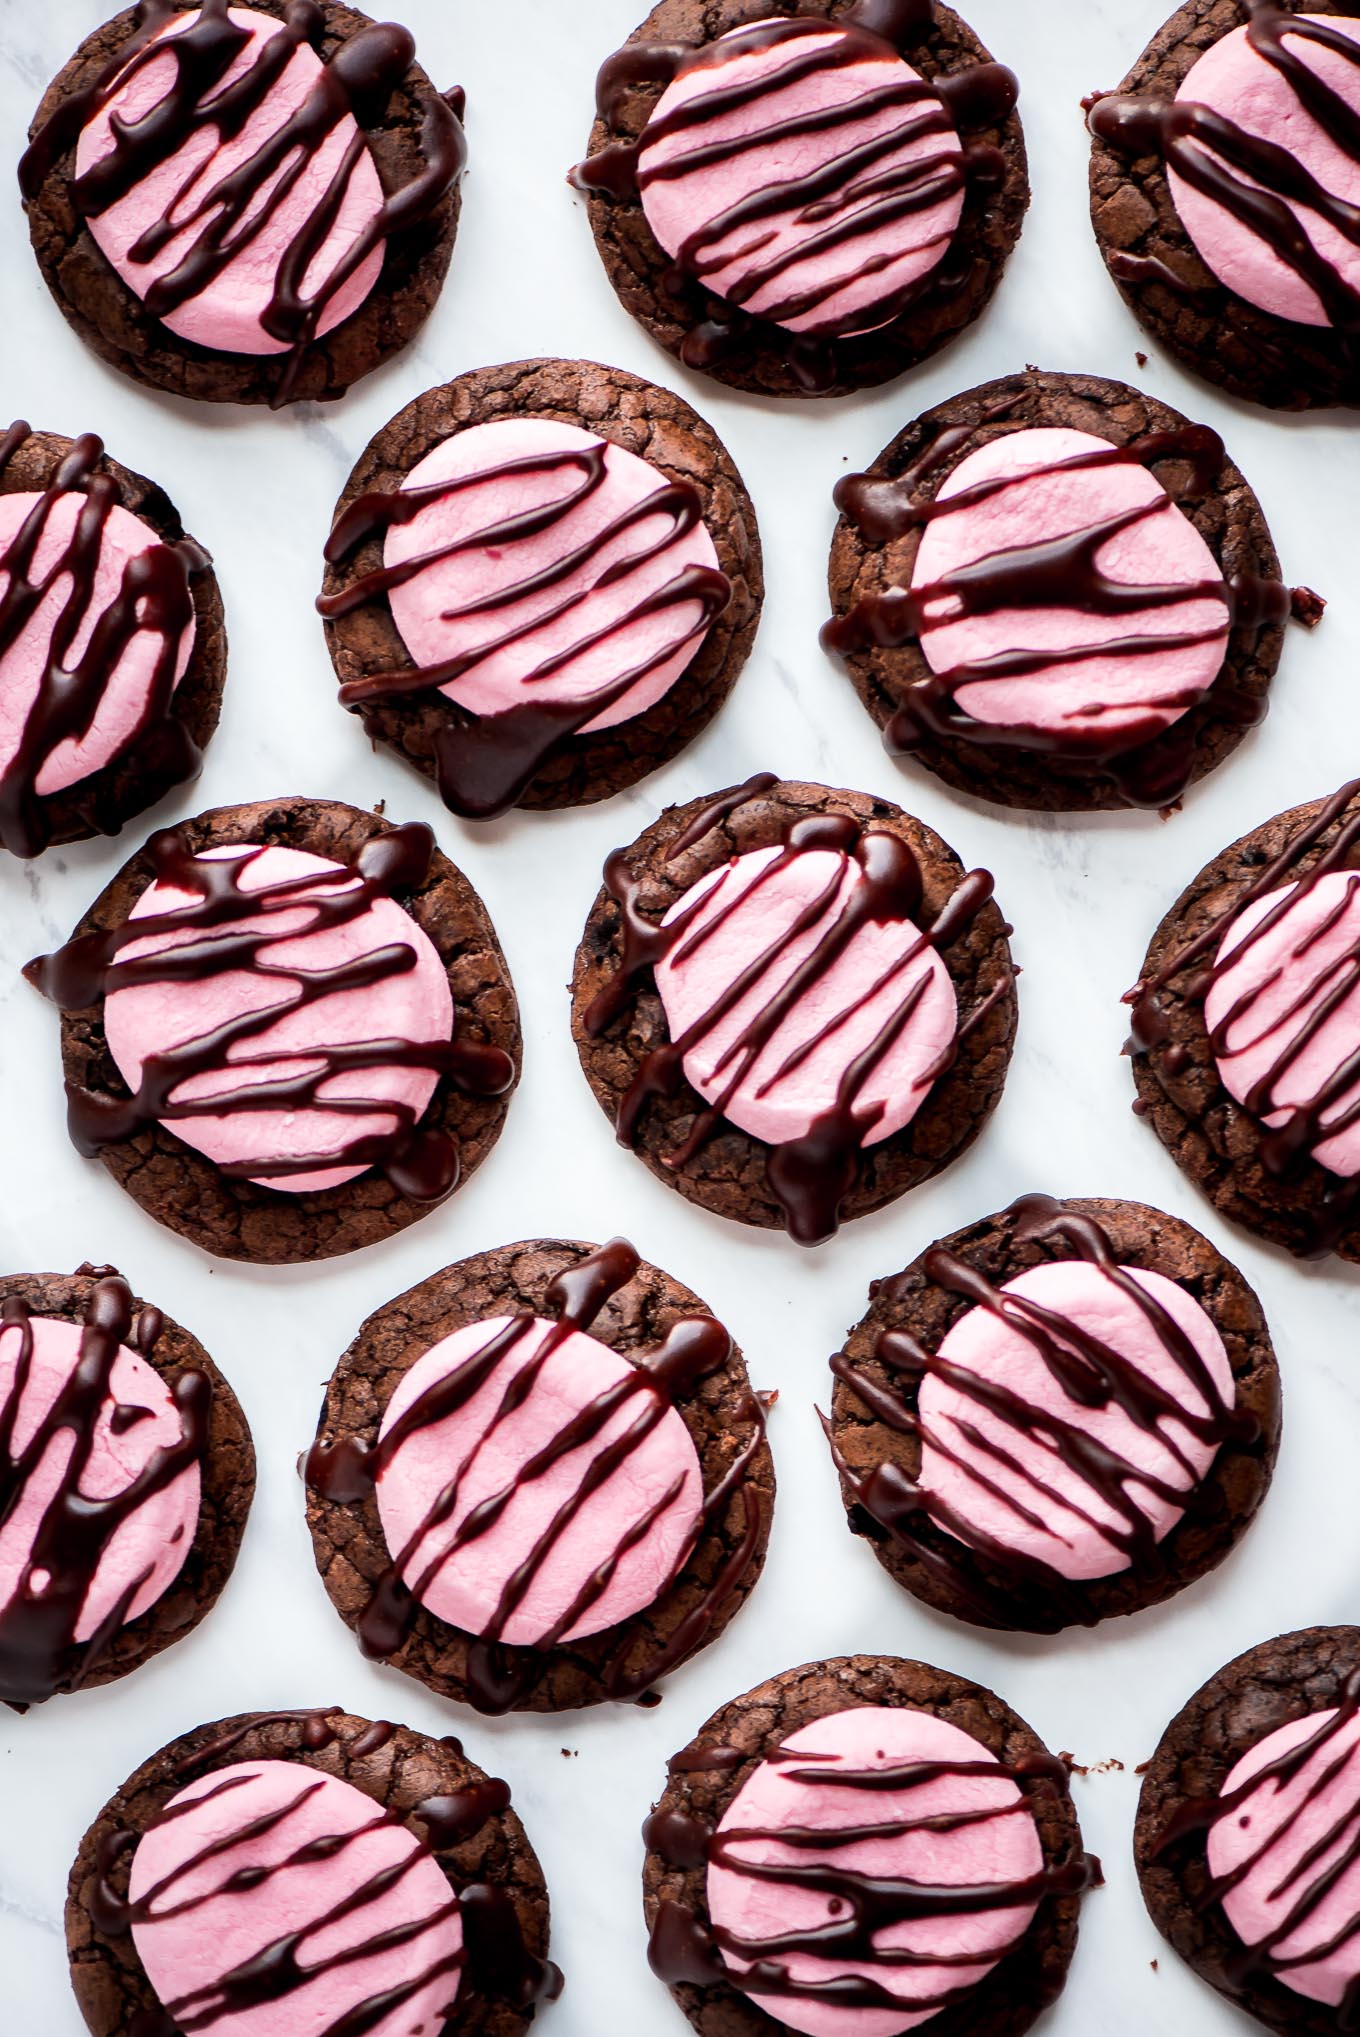 Many Marshmallow Cookies topped with a pink marshmallow and drizzled with chocolate icing.